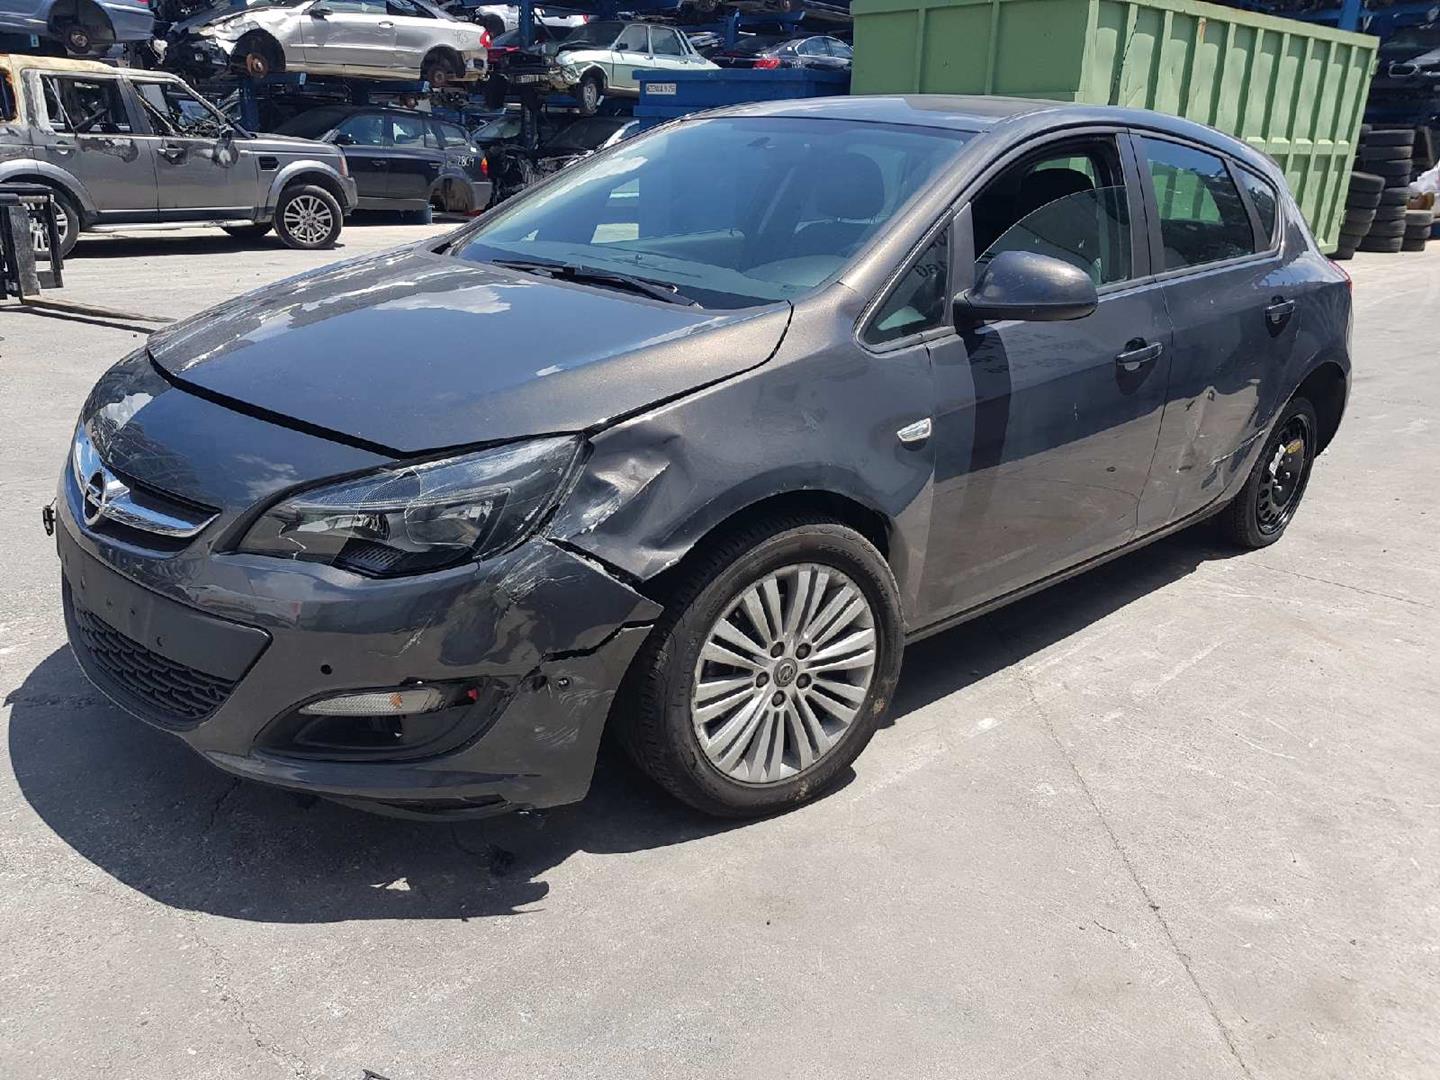 OPEL Astra J (2009-2020) Other Body Parts 13252702, 6PV00976507, 13252702 19678286